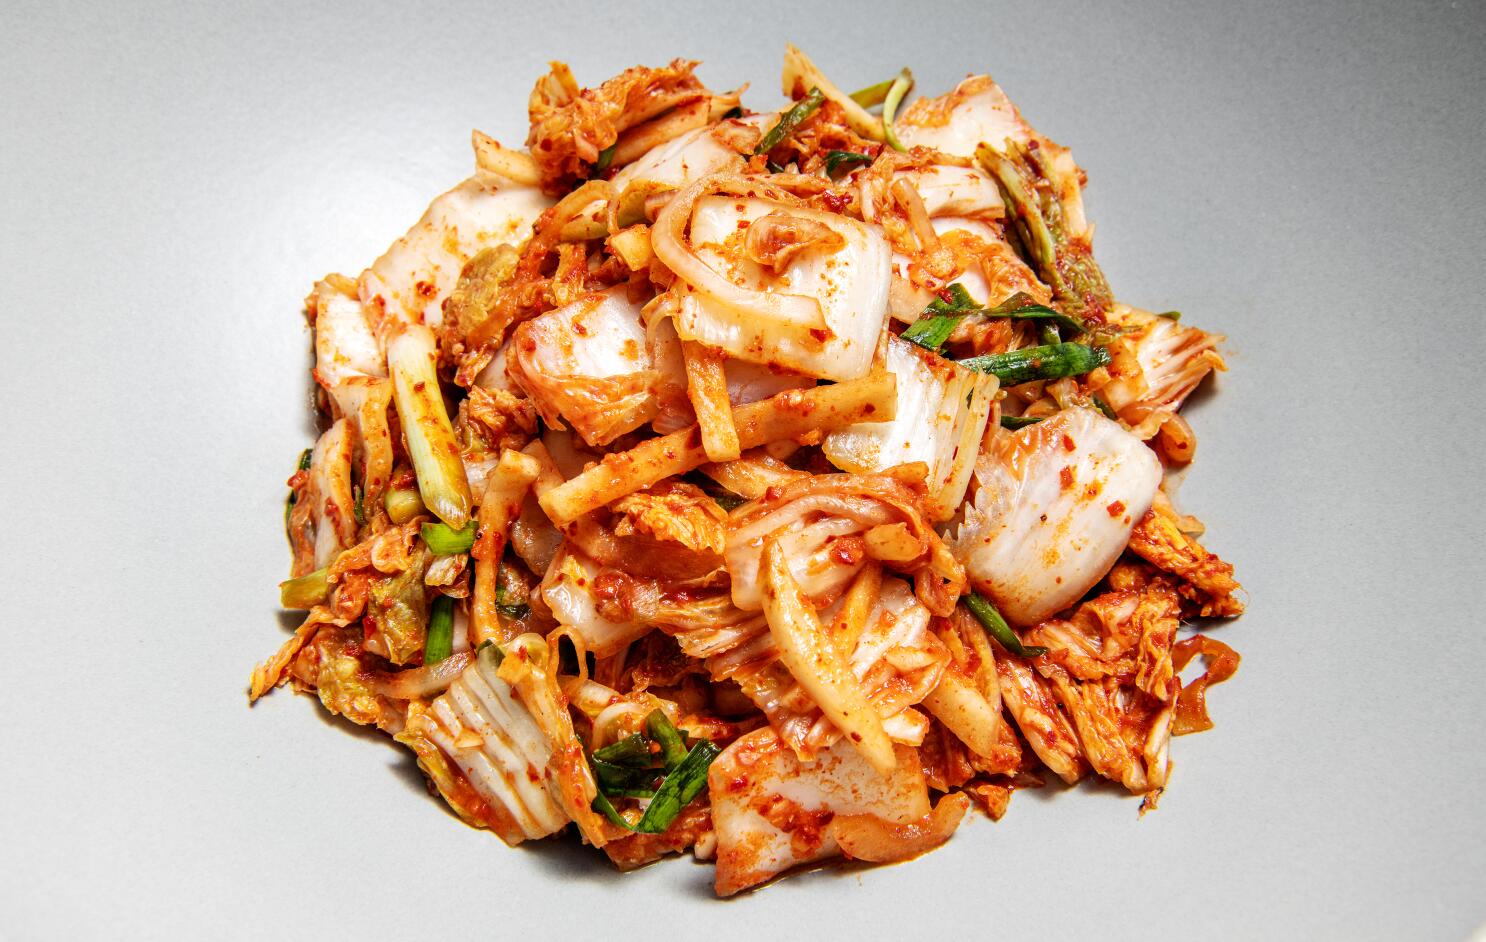 Kimchi Delivery Near You, Best Restaurants & Deals